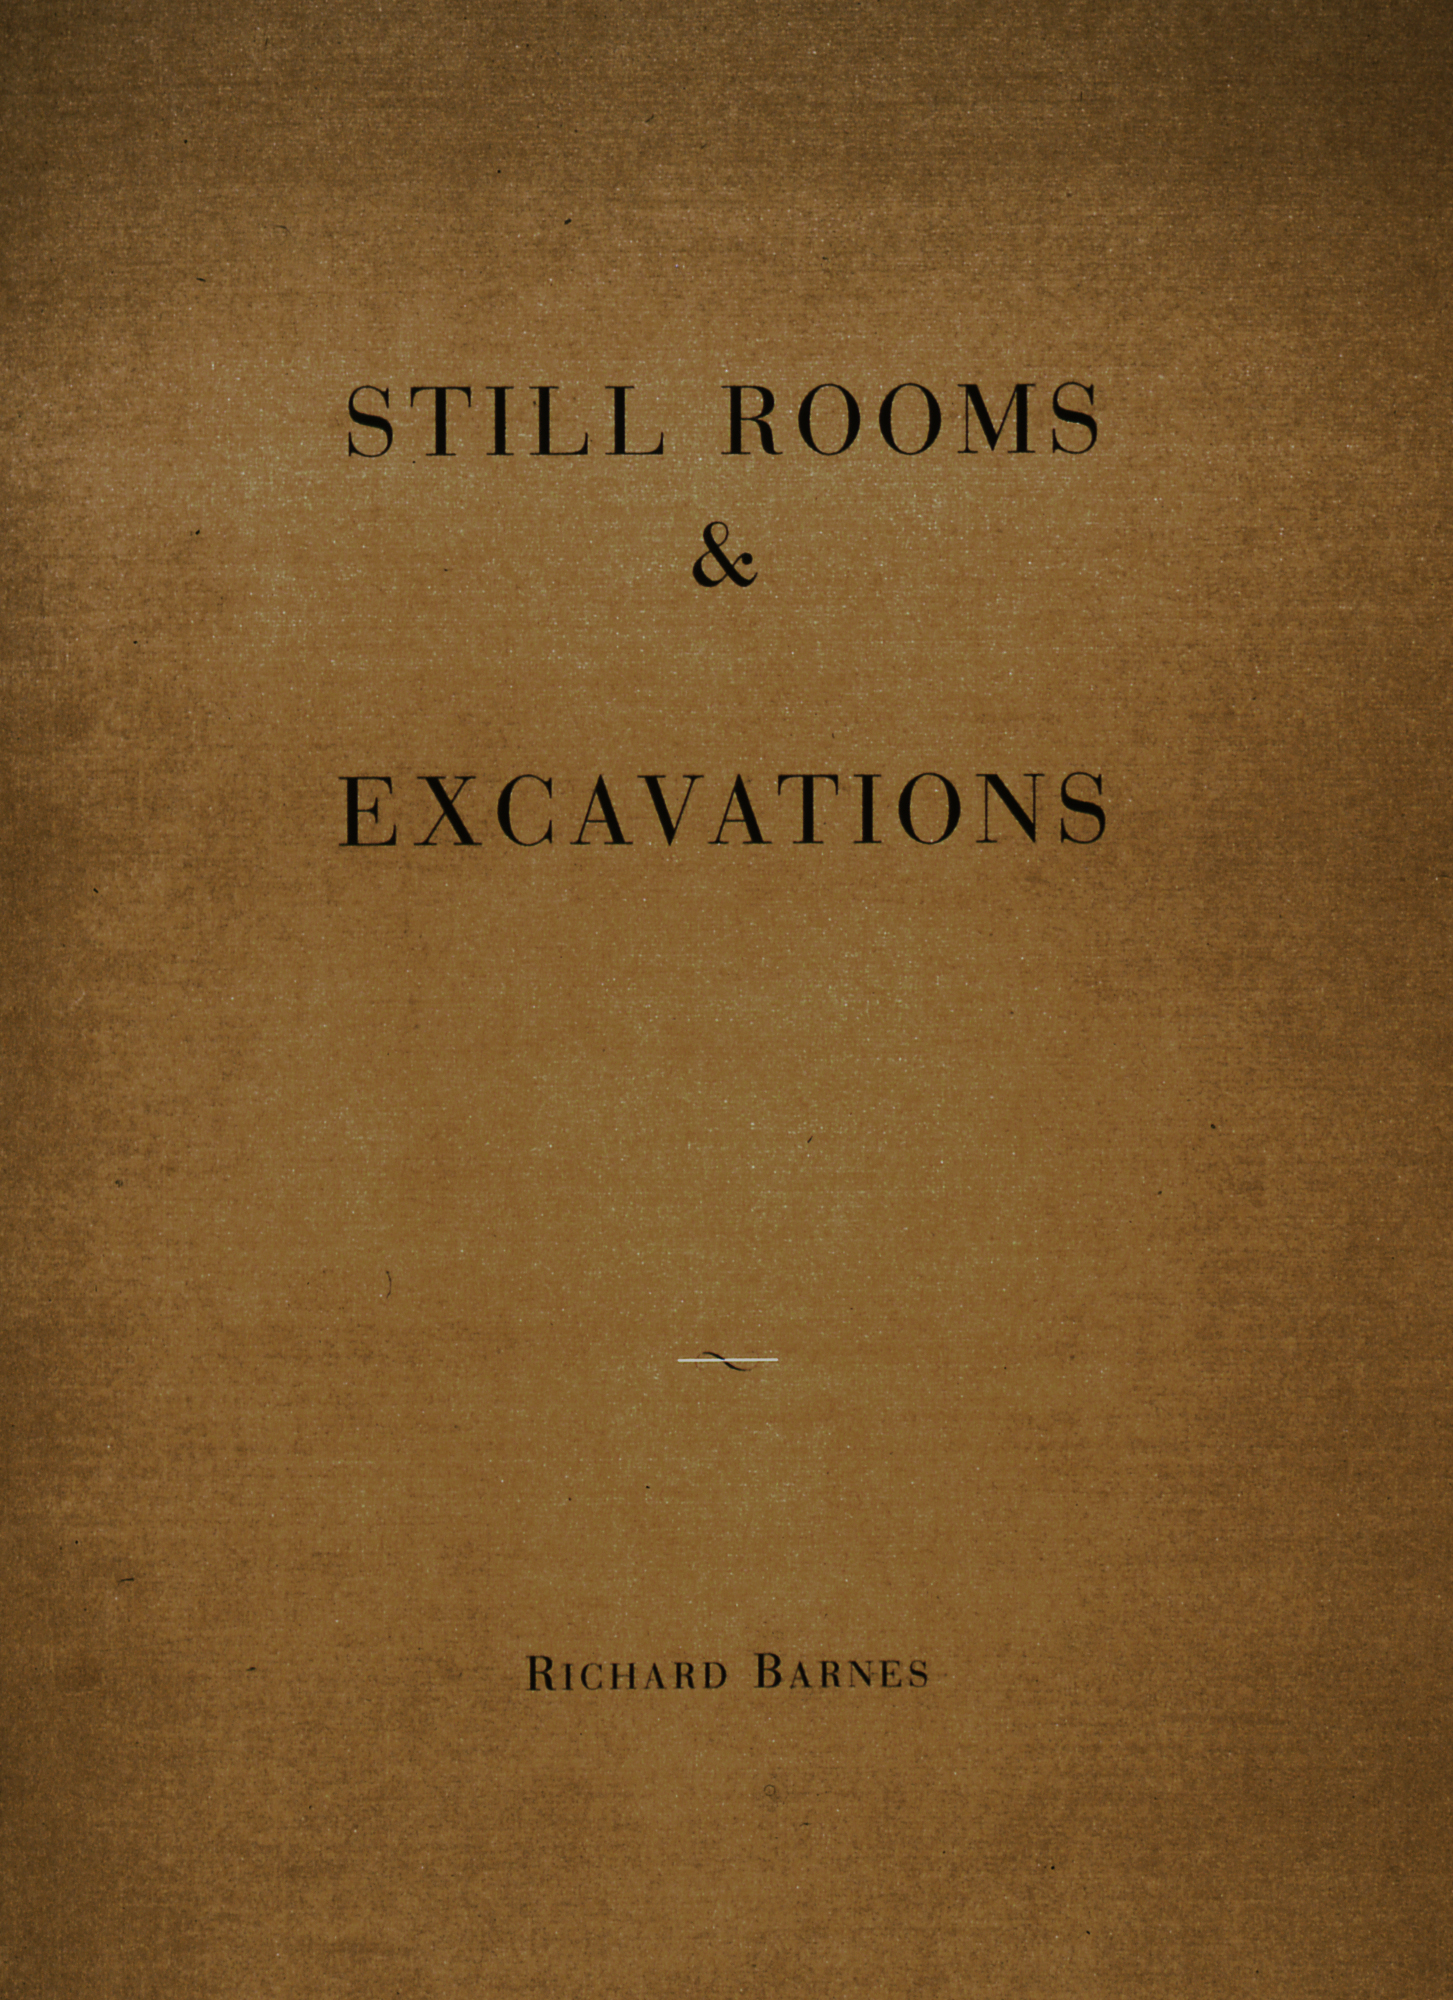  Still Rooms &amp; Excavations, Catalogue with Essays by Richard Barnes and Douglas Nickel, 1997 